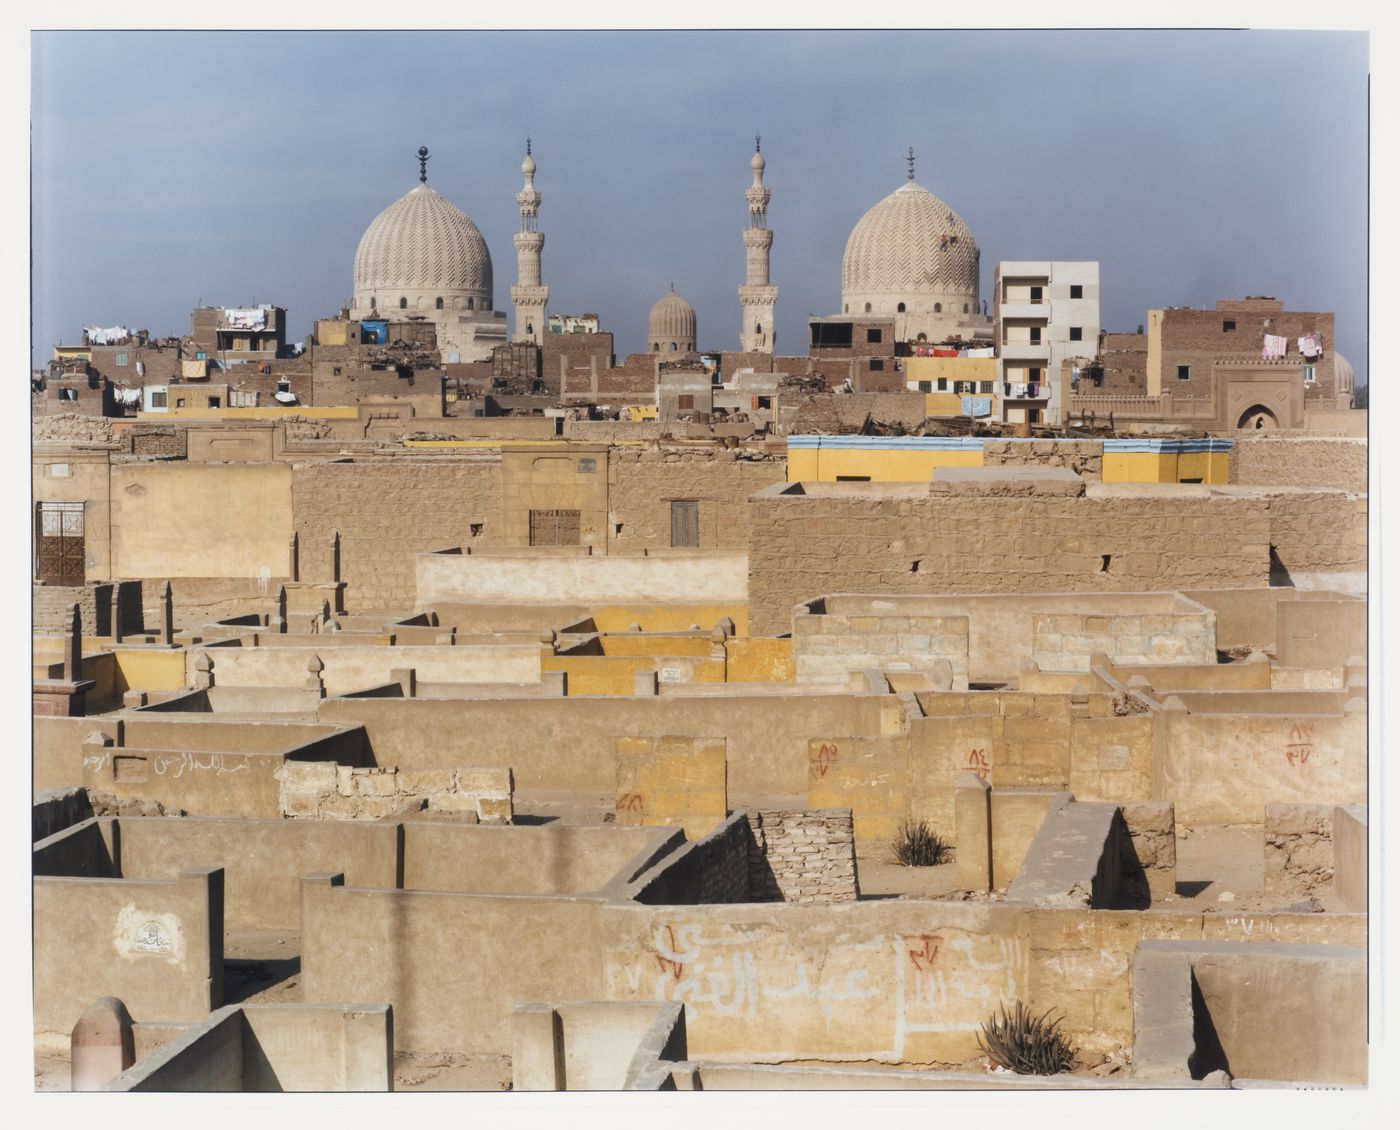 Mausoleum of Sultan Barquq, from the East, with city walls and houses in foreground, Cairo, Egypt